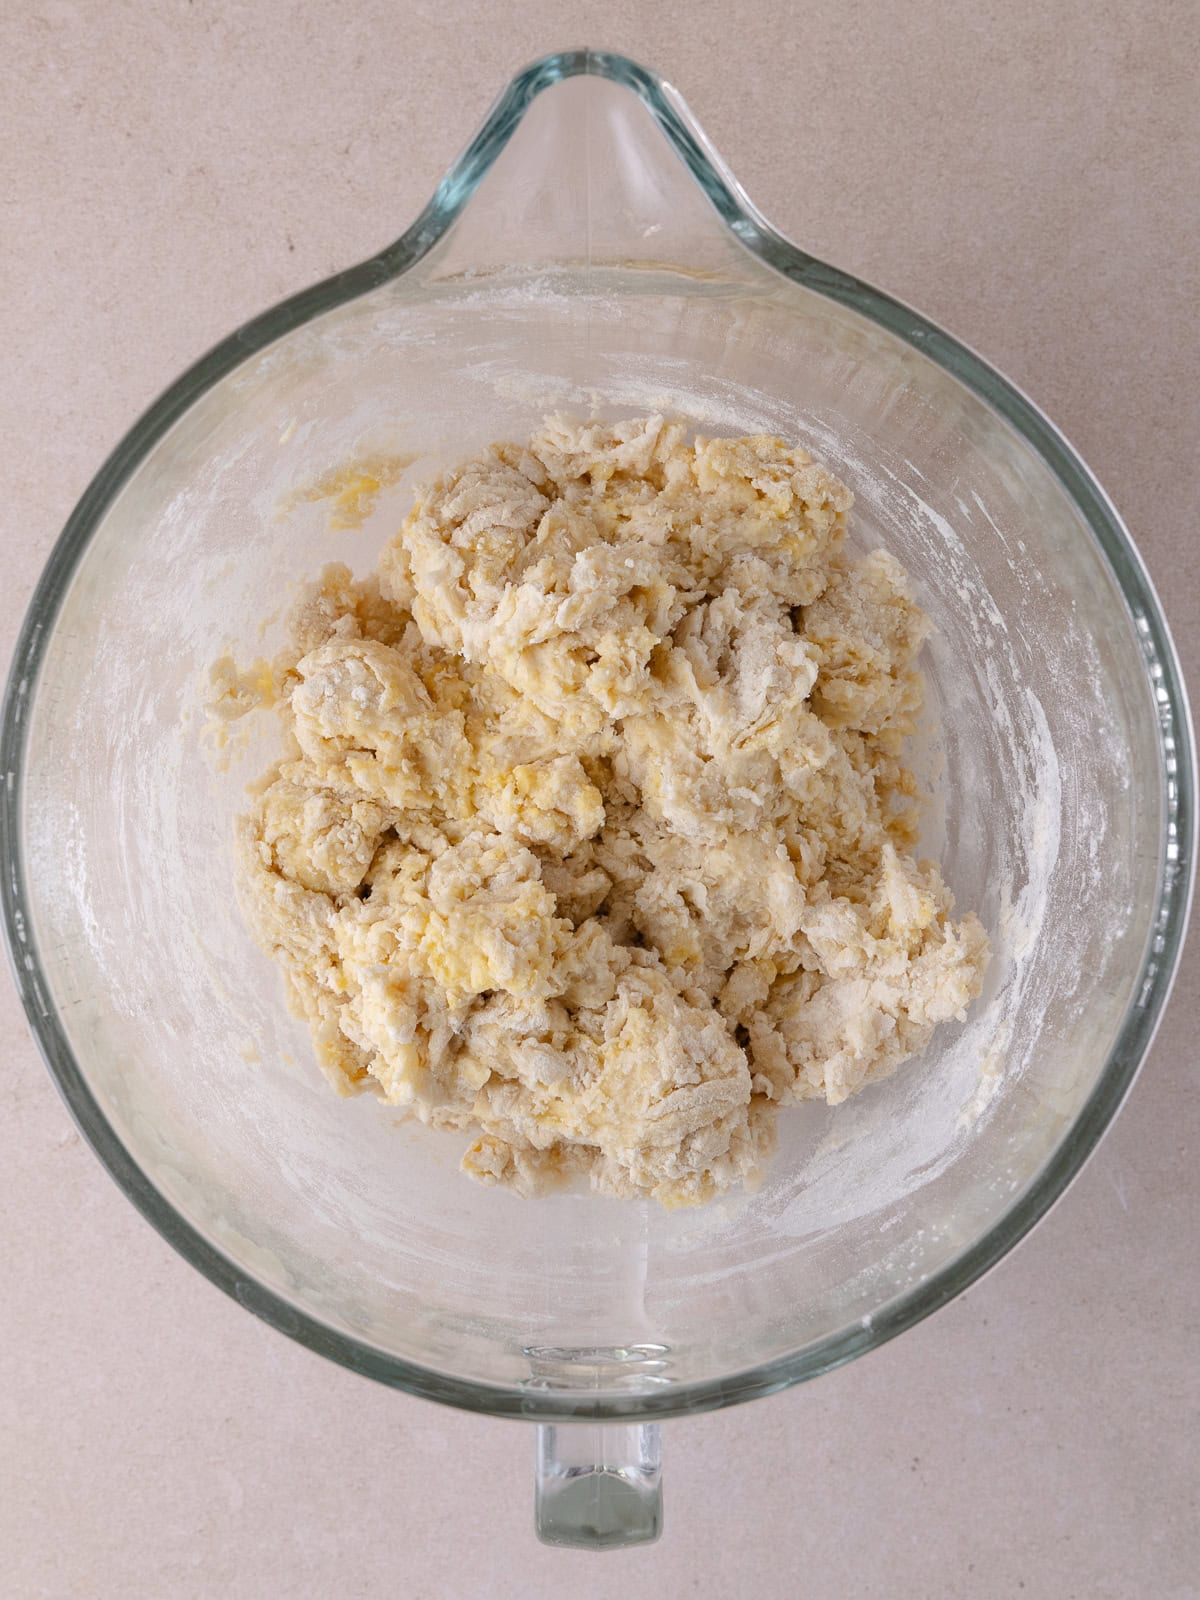 A shaggy ball of dough has been formed by mixing all the dough ingredients in a large mixing bowl.